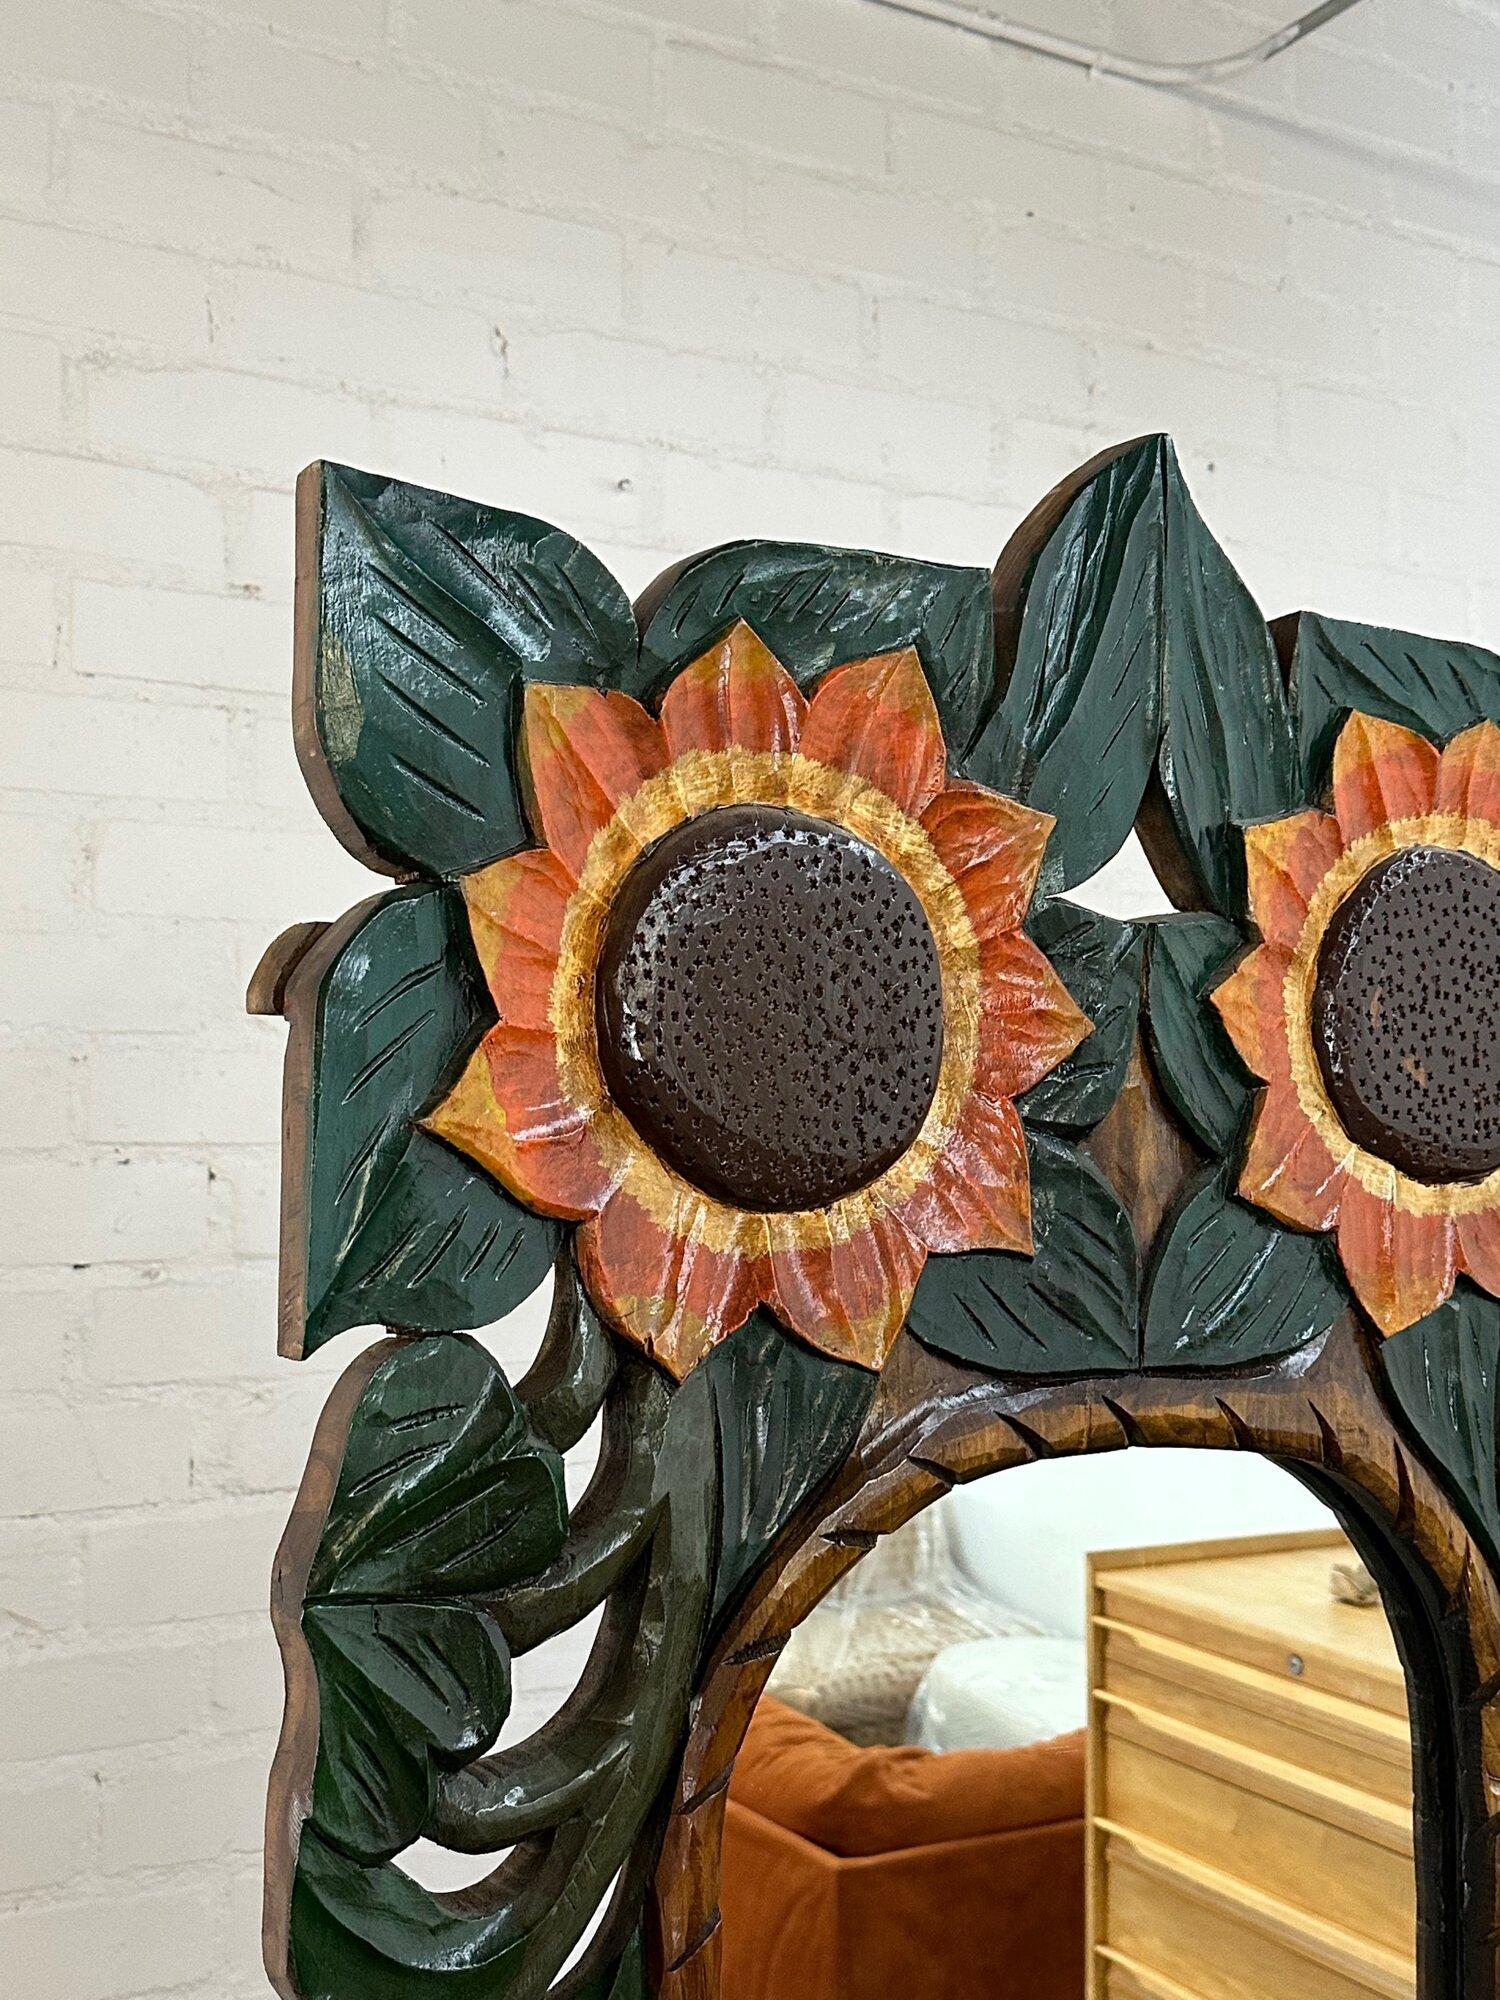 W33 H82 D20.5 
Large floor mirror with sunflower detailed carvings. Item is structurally sound and sturdy. Item features a newly cut glass. Floor mirror has no major areas of wear.
